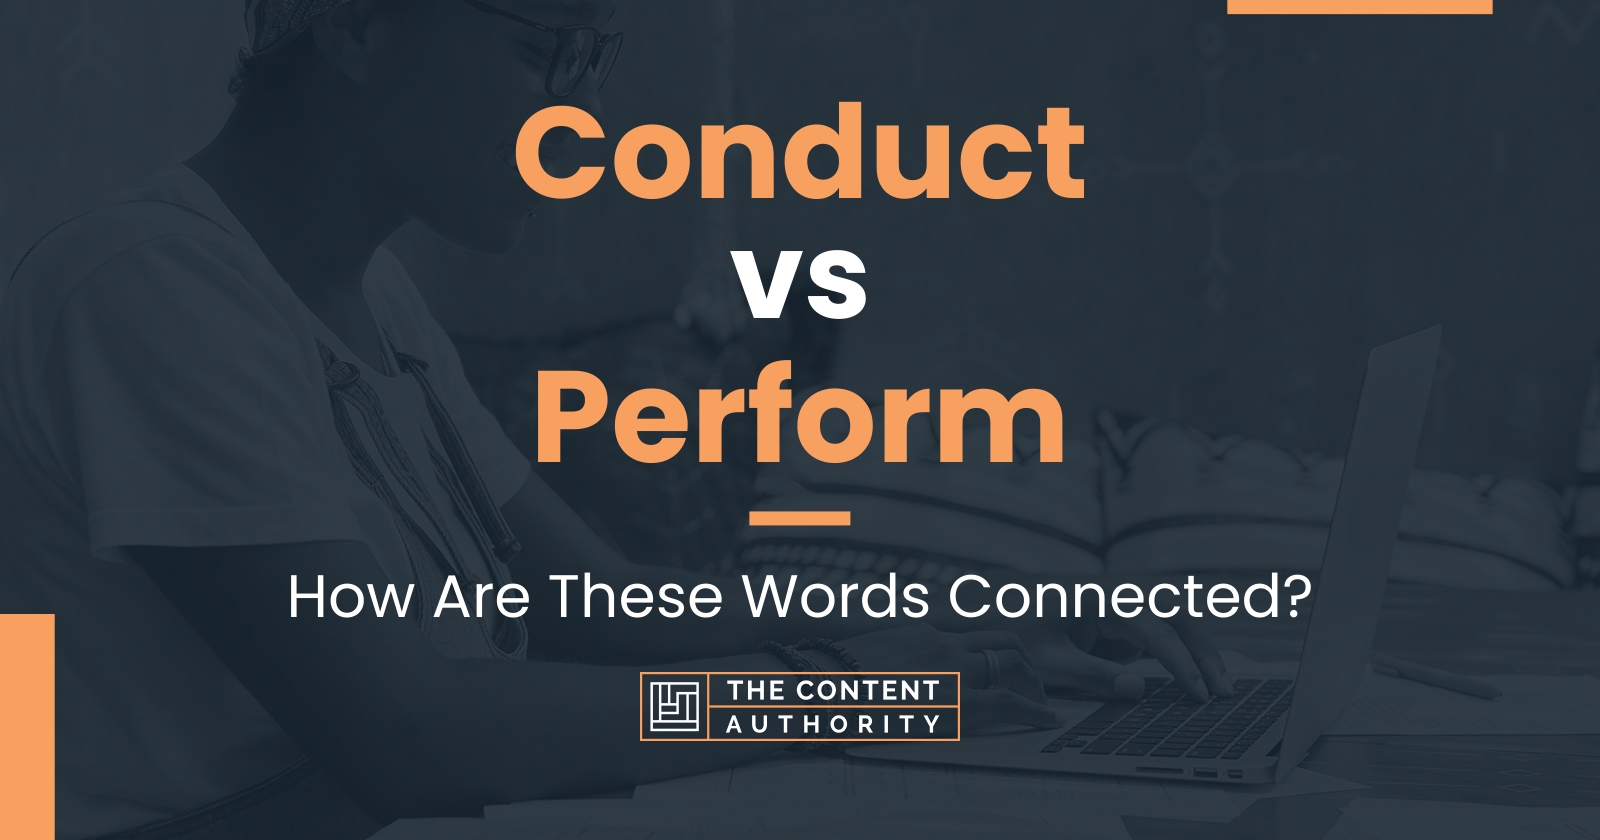 Conduct vs Perform: How Are These Words Connected?